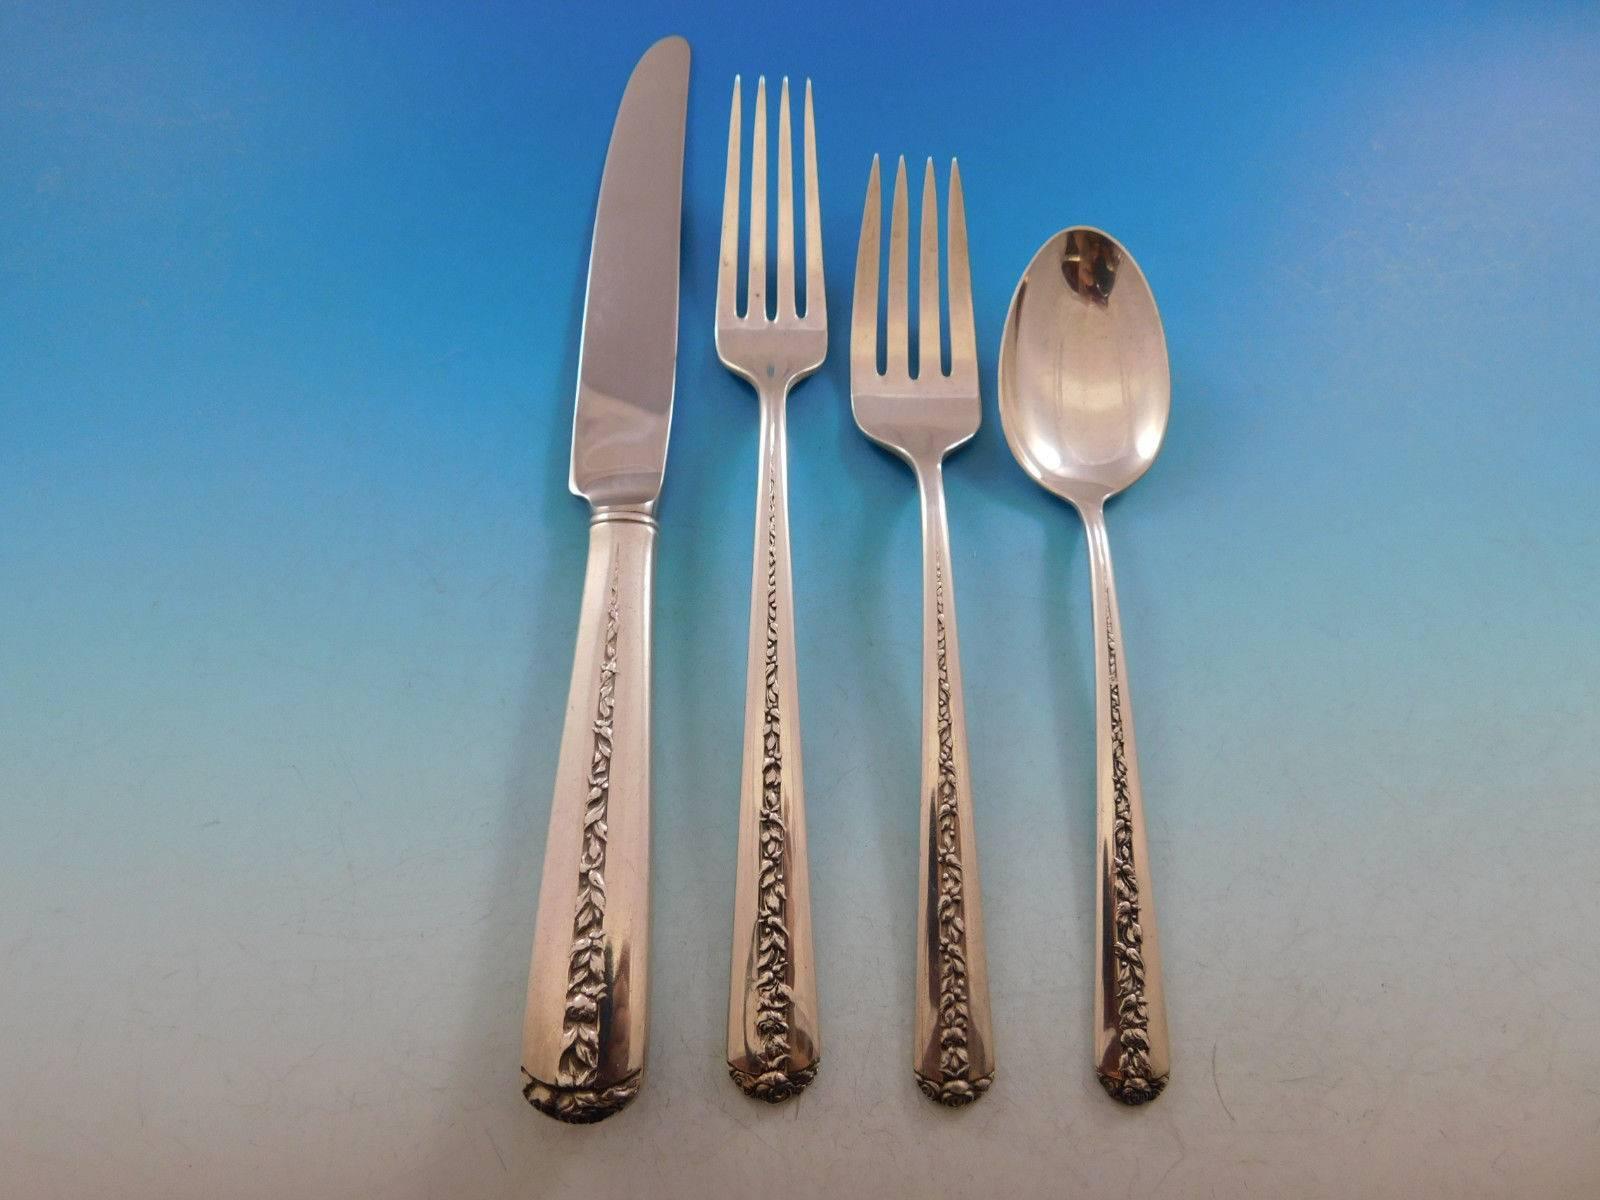 Rambler Rose by Towle sterling silver flatware set of 34 pieces. This set includes:

Six knives, 8 3/4